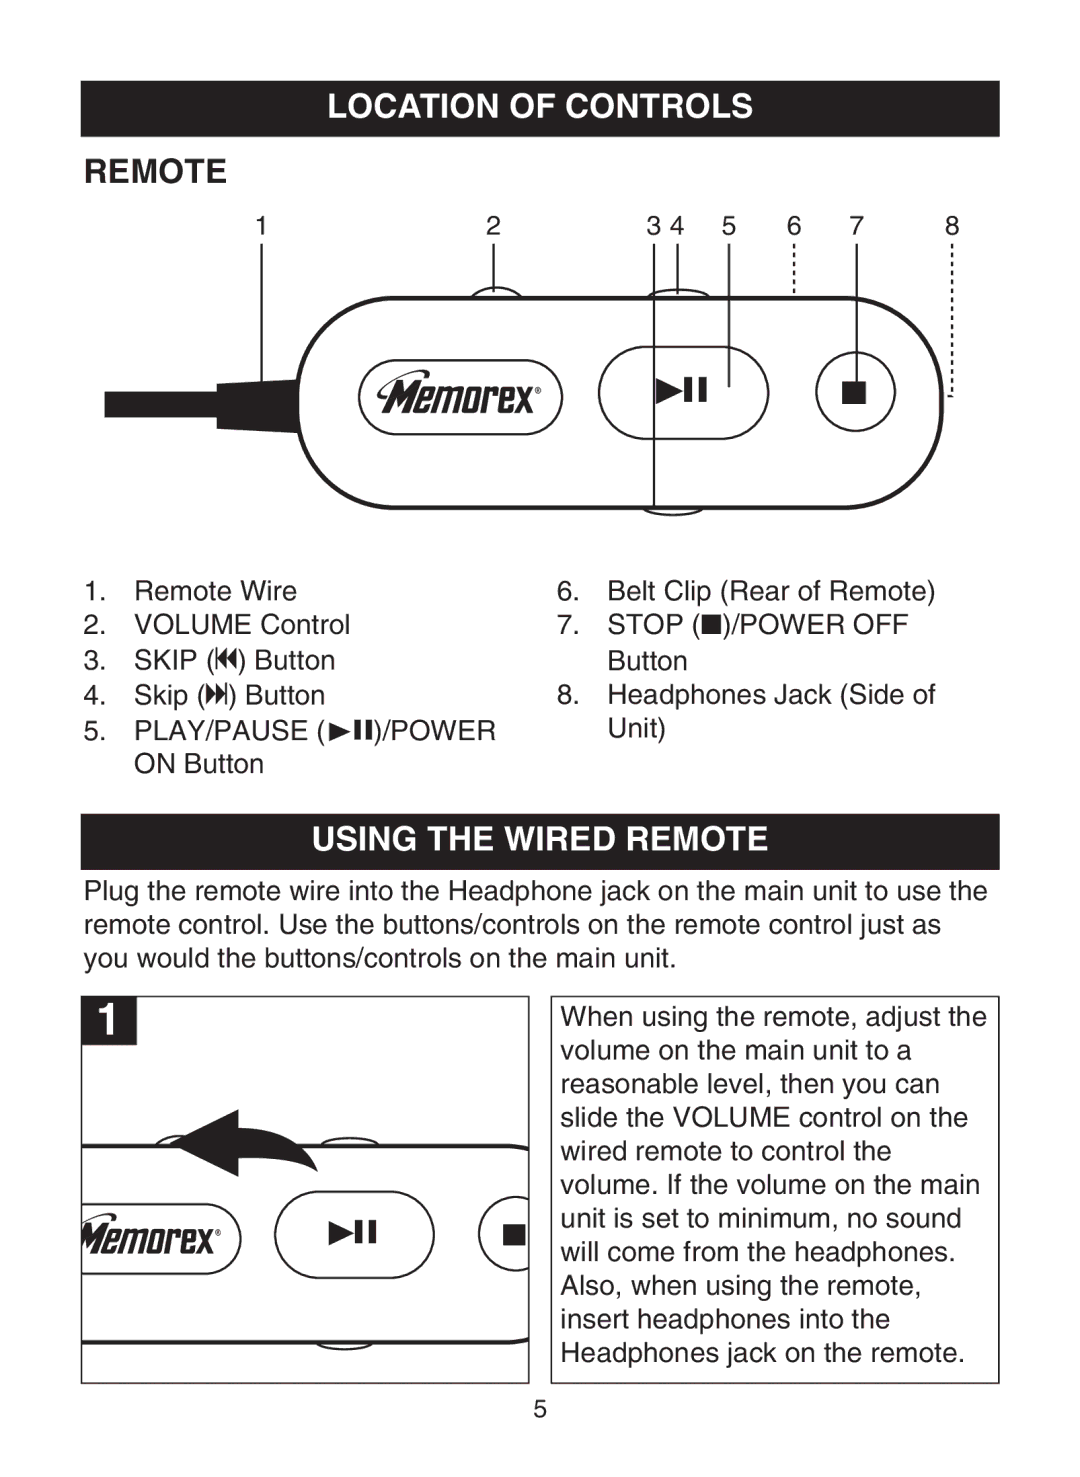 Memorex MPD8812 manual Using the Wired Remote 